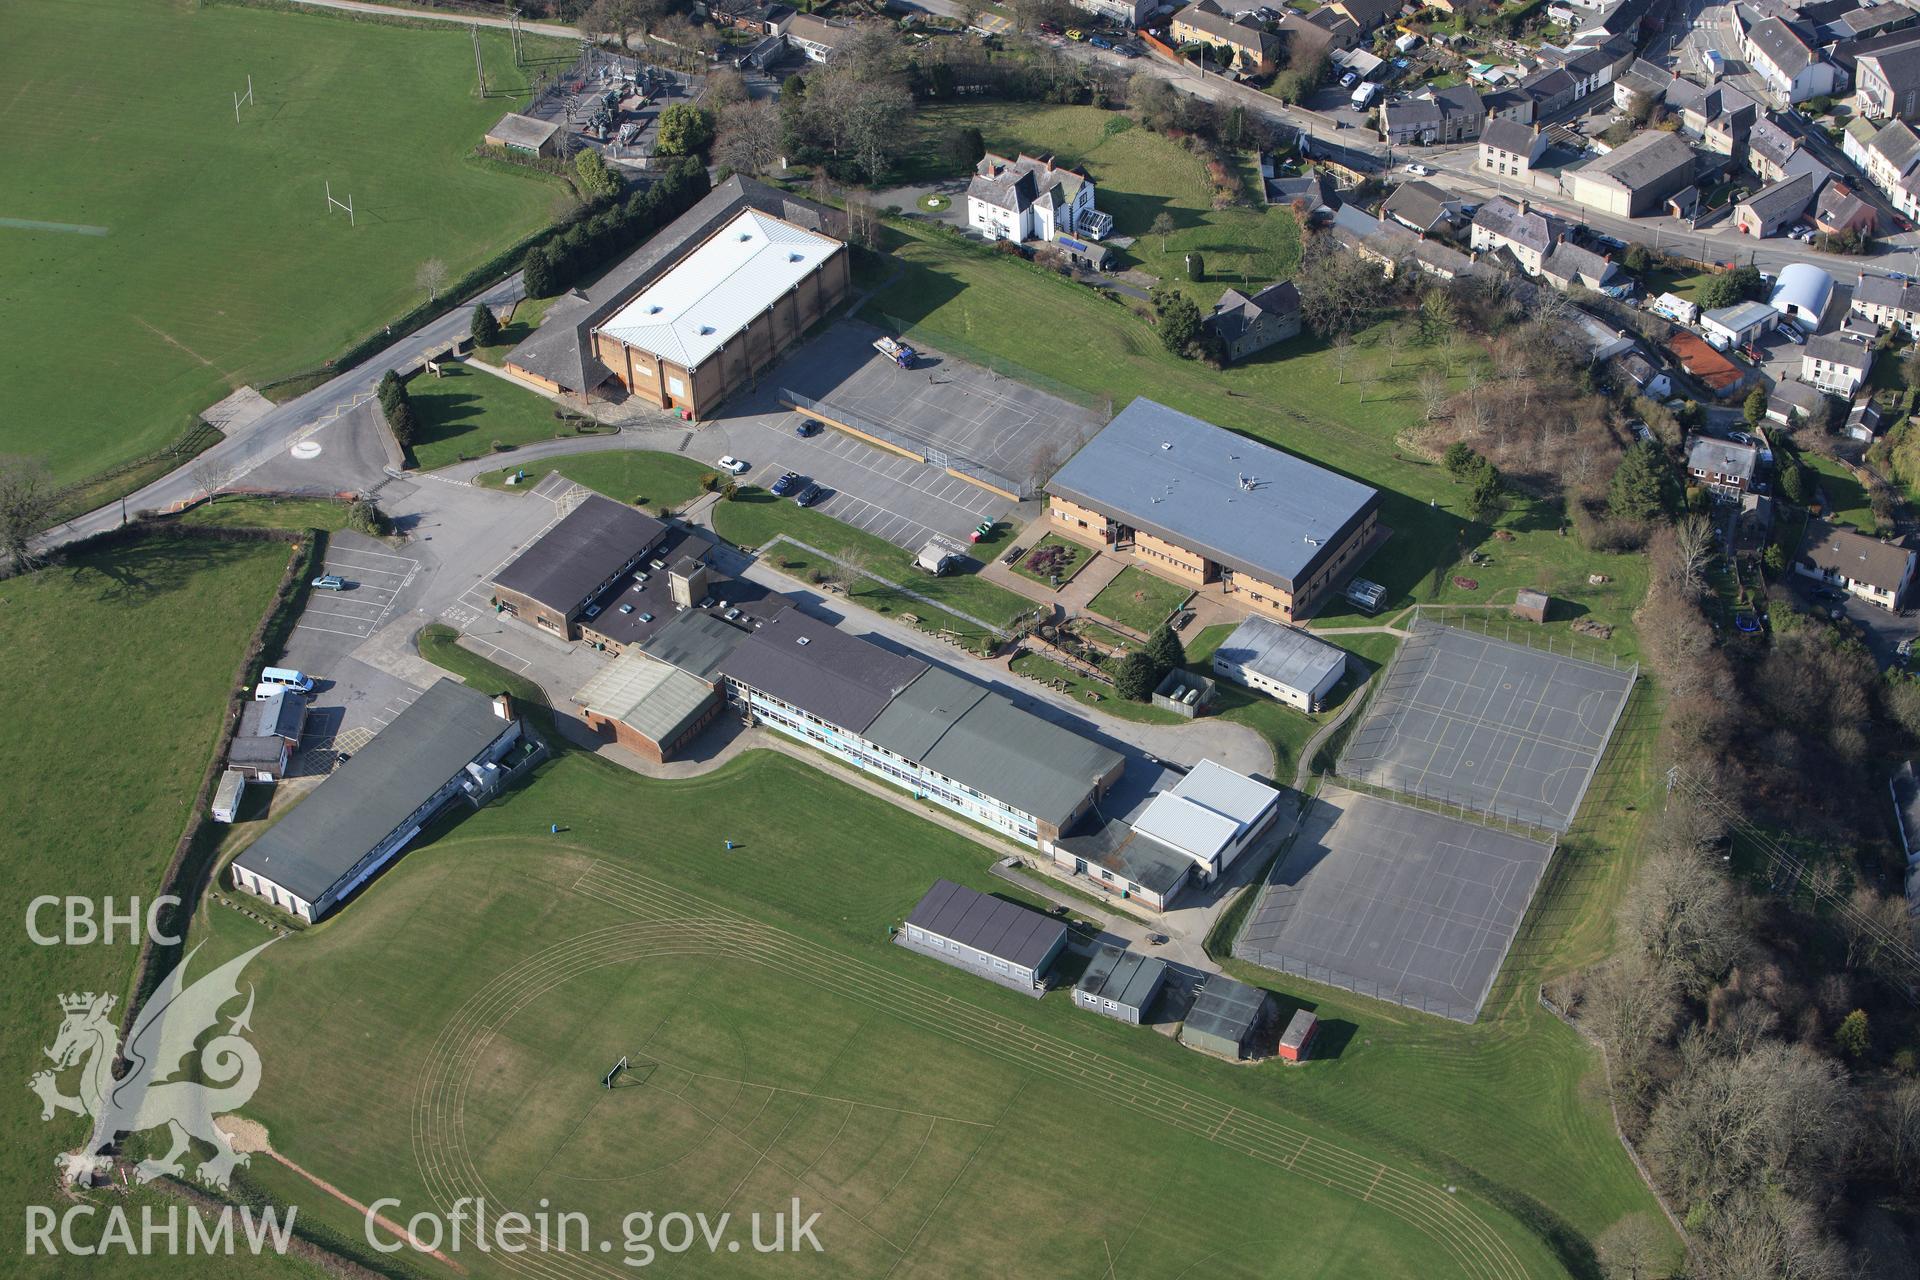 RCAHMW colour oblique aerial photograph of Newcastle Emlyn, comprehensive school. Taken on 13 April 2010 by Toby Driver